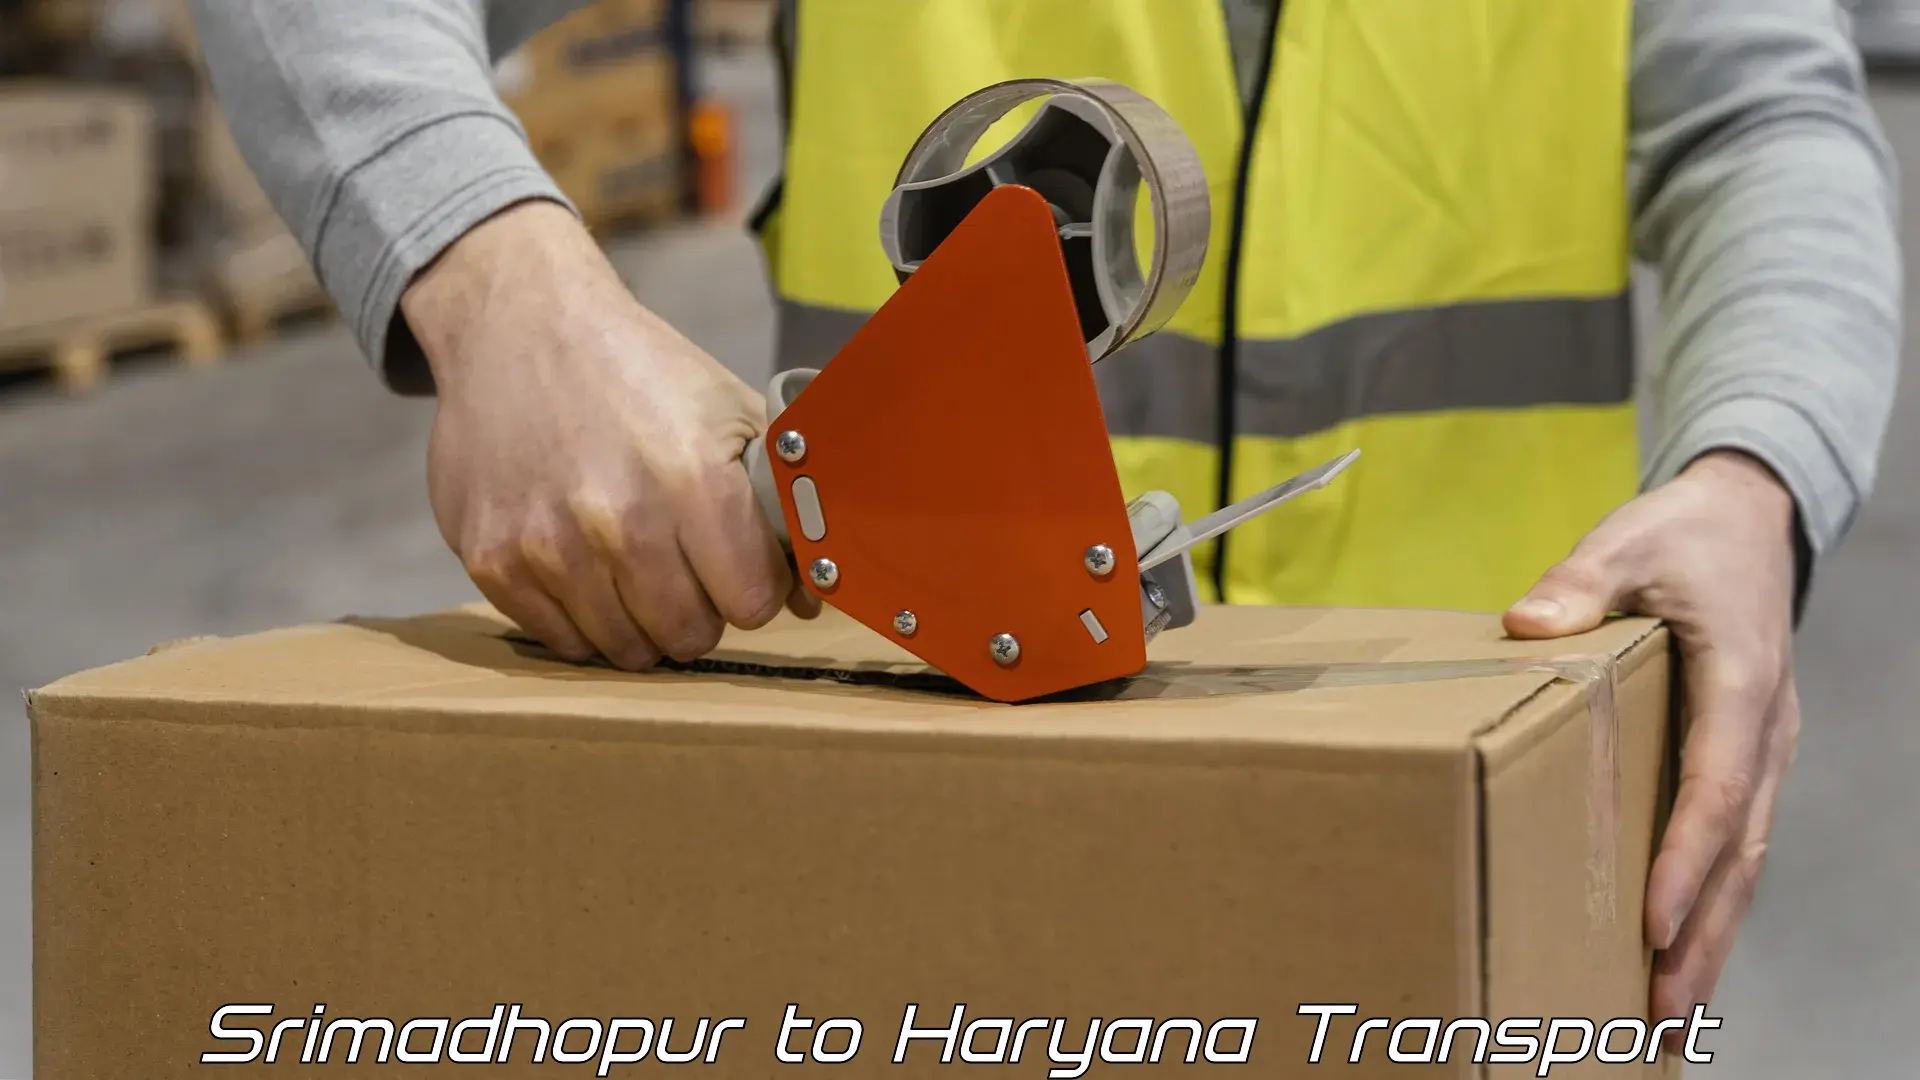 Goods delivery service Srimadhopur to Haryana